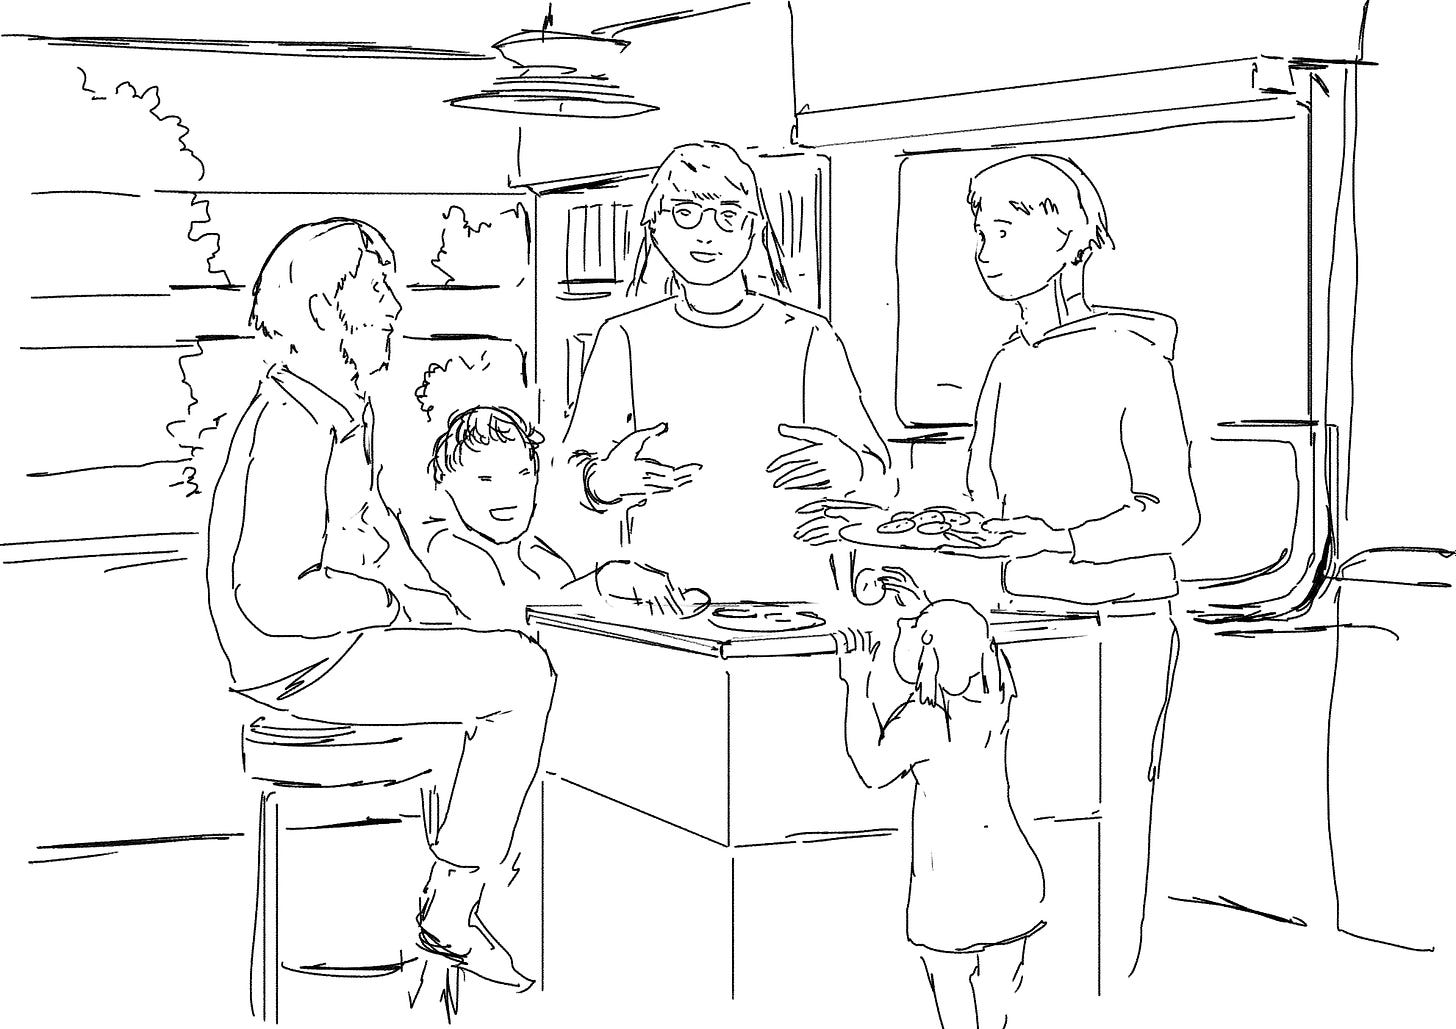 A linework sketch of a family scene. Everyone is happy, and a robot serves cookies.